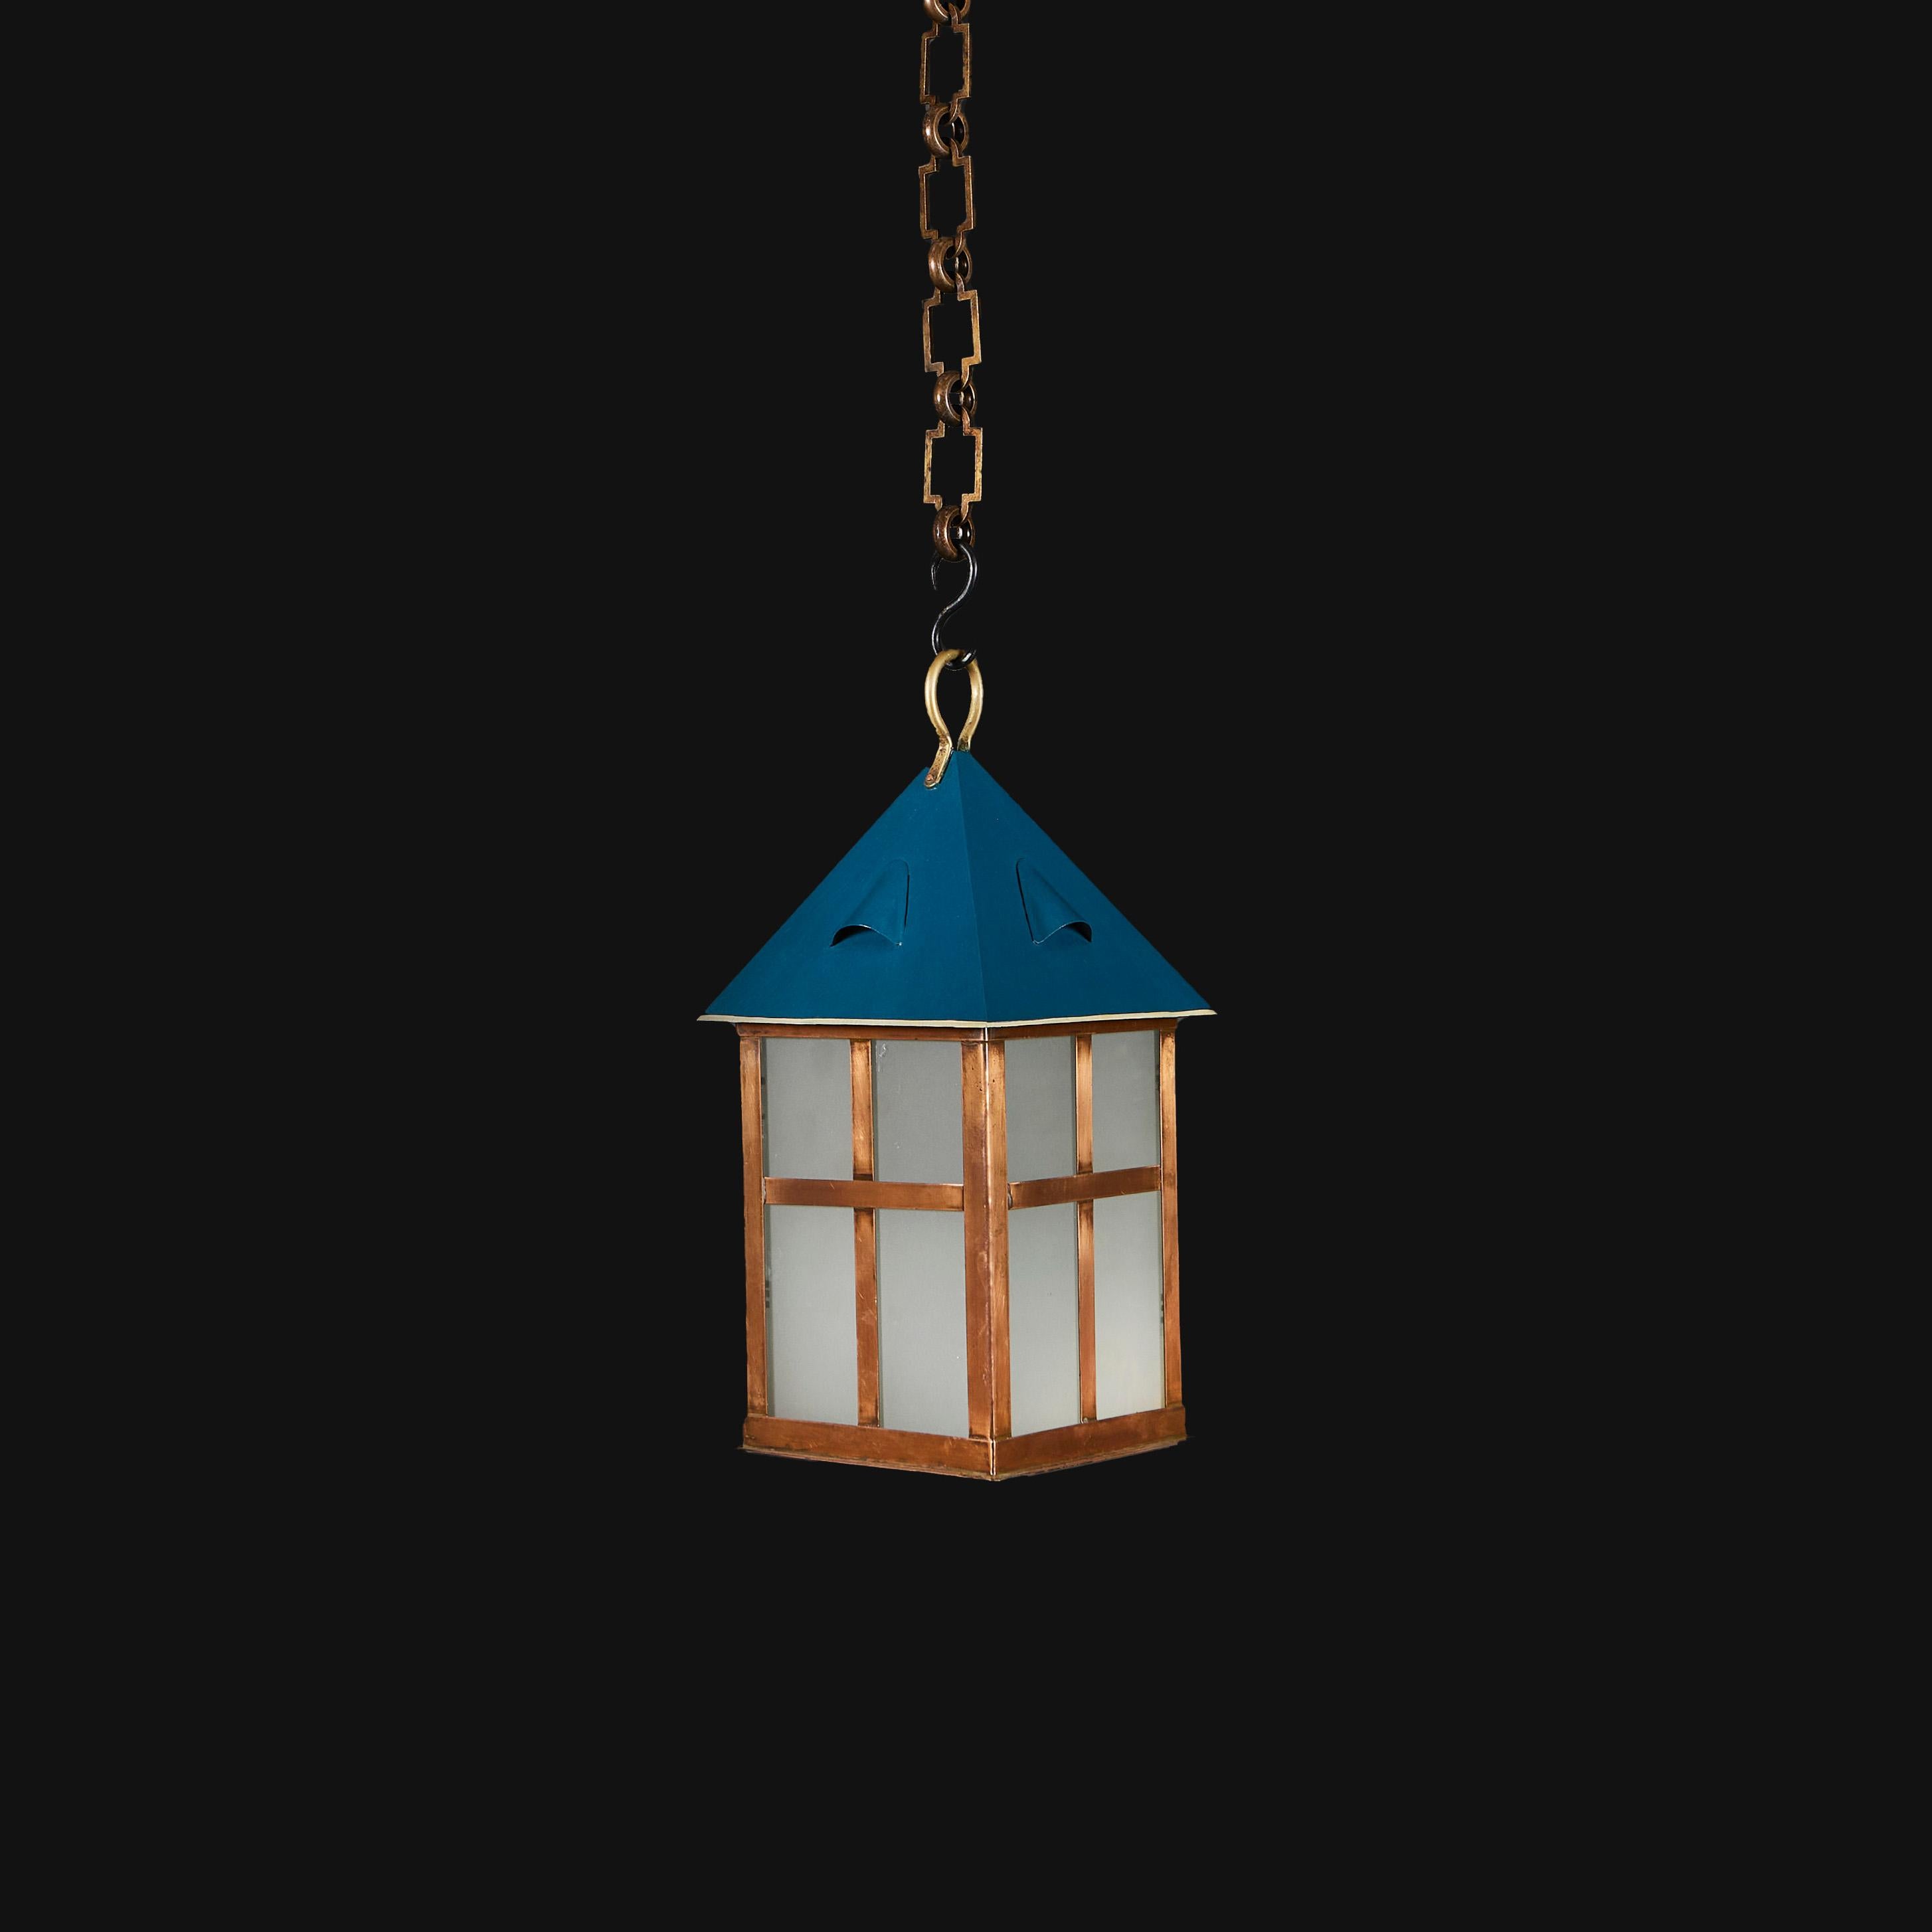 England, circa 1910

A copper Arts and Crafts Hanging Lantern with frosted glass panels and blue painted canopy. 

Height 40.00cm

Width 18.00cm

Depth 18.00cm